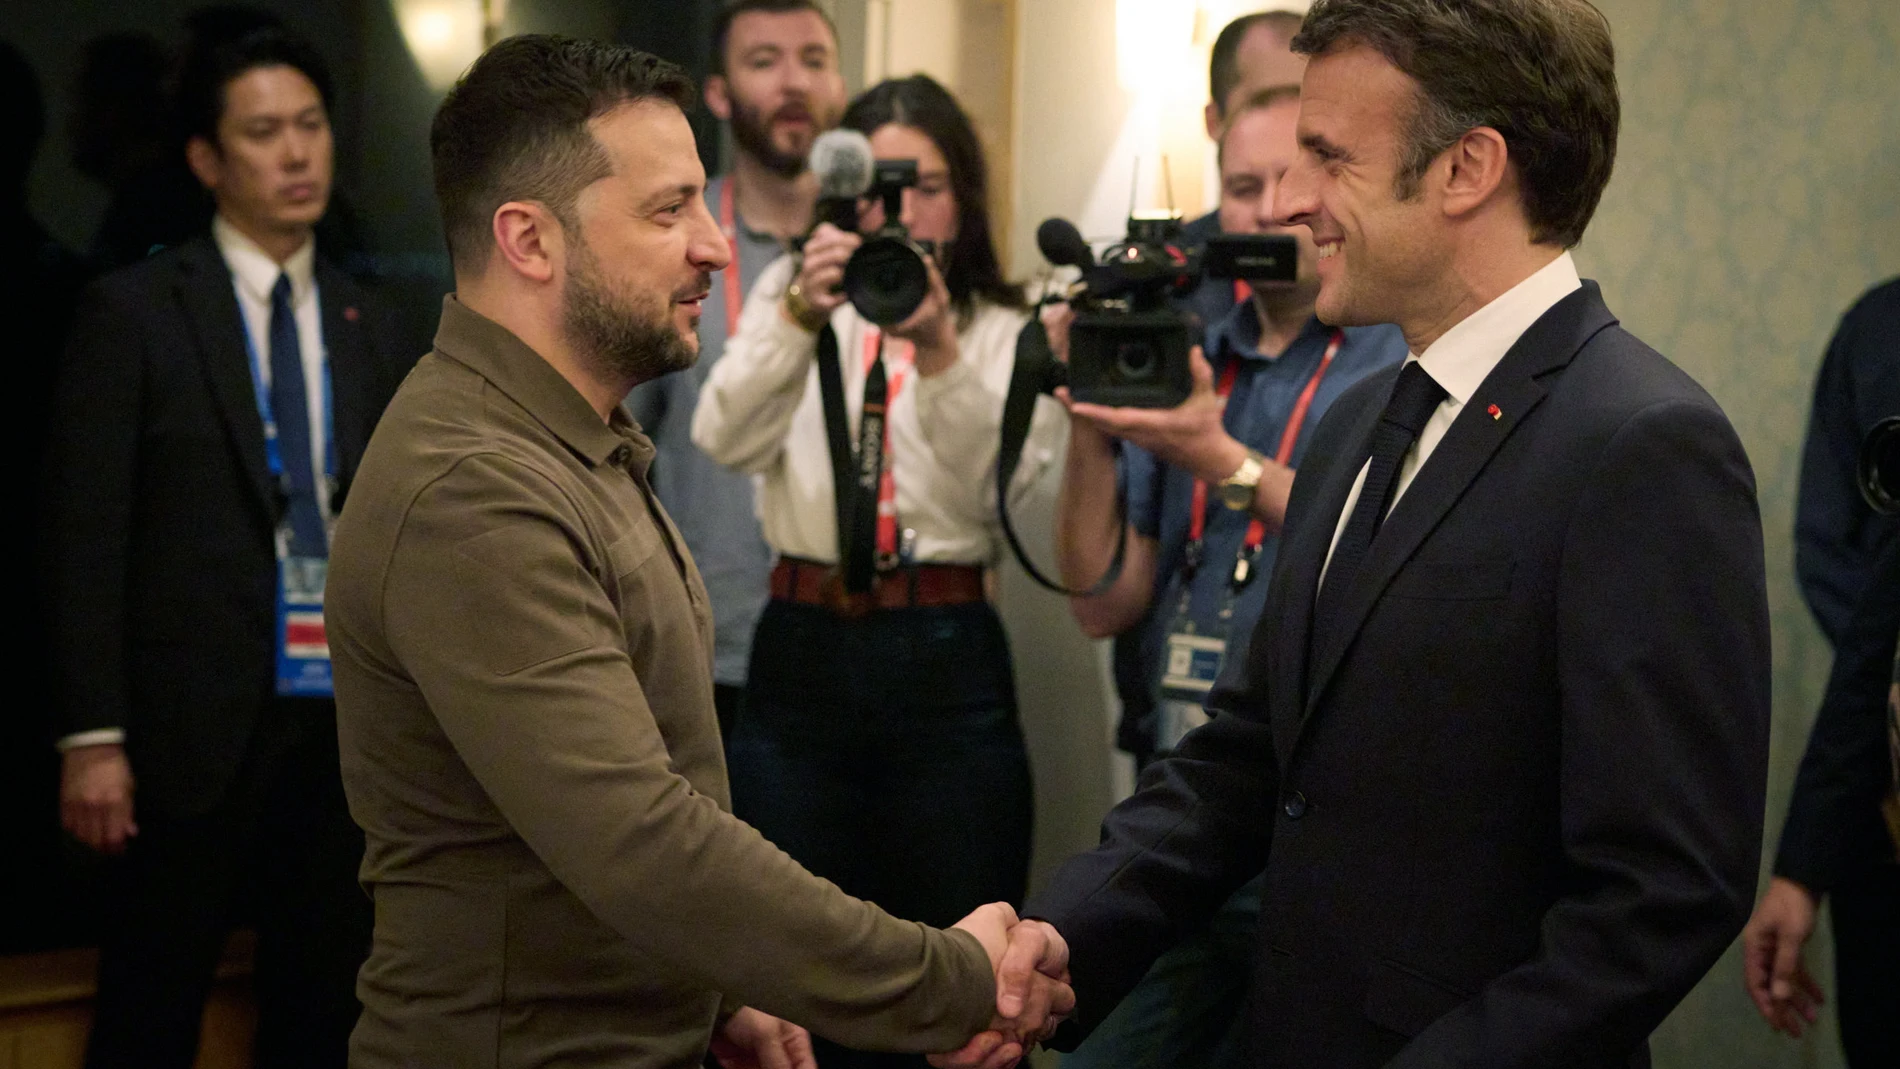 Hiroshima (Japan), 20/05/2023.- A handout photo made available by the Ukrainian Presidential Press Service shows Ukraine's President Volodymyr Zelensky (L) with France's President Emmanuel Macron (R) during a meeting, in Hiroshima, Japan, 20 May 2023, on the sidelines of the G7 Summit Leaders' Meeting. The G7 Hiroshima Summit will be held from 19 to 21 May 2023. (Francia, Japón, Ucrania) EFE/EPA/UKRAINIAN PRESIDENTIAL PRESS SERVICE HANDOUT -- MANDATORY CREDIT: UKRAINIAN PRESIDENTIAL PRESS SERVICE -- HANDOUT EDITORIAL USE ONLY/NO SALES
